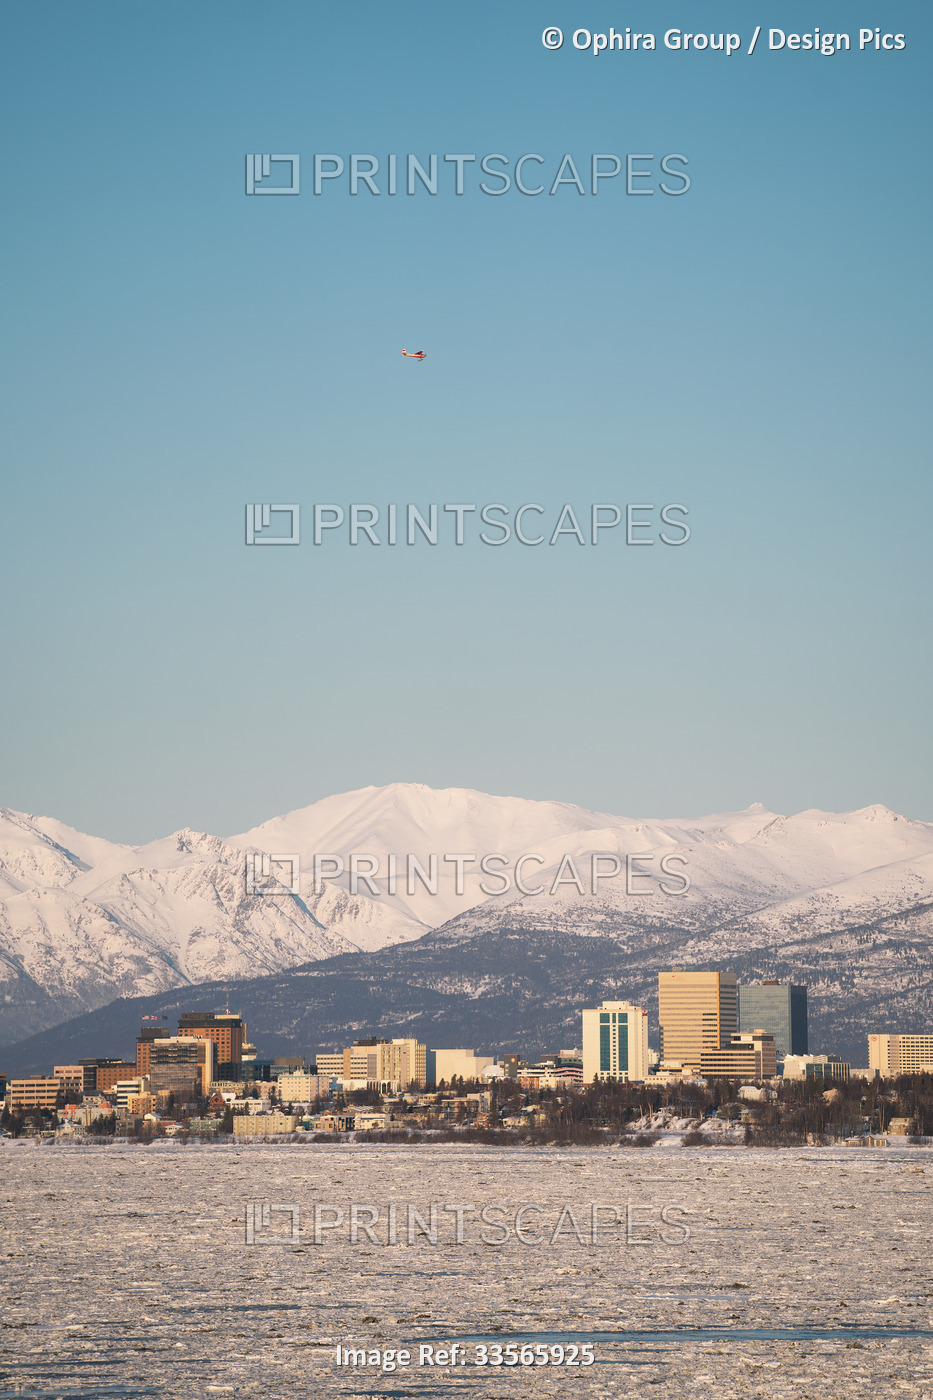 The city of Anchorage, Alaska and its office buildings and high rises can be ...